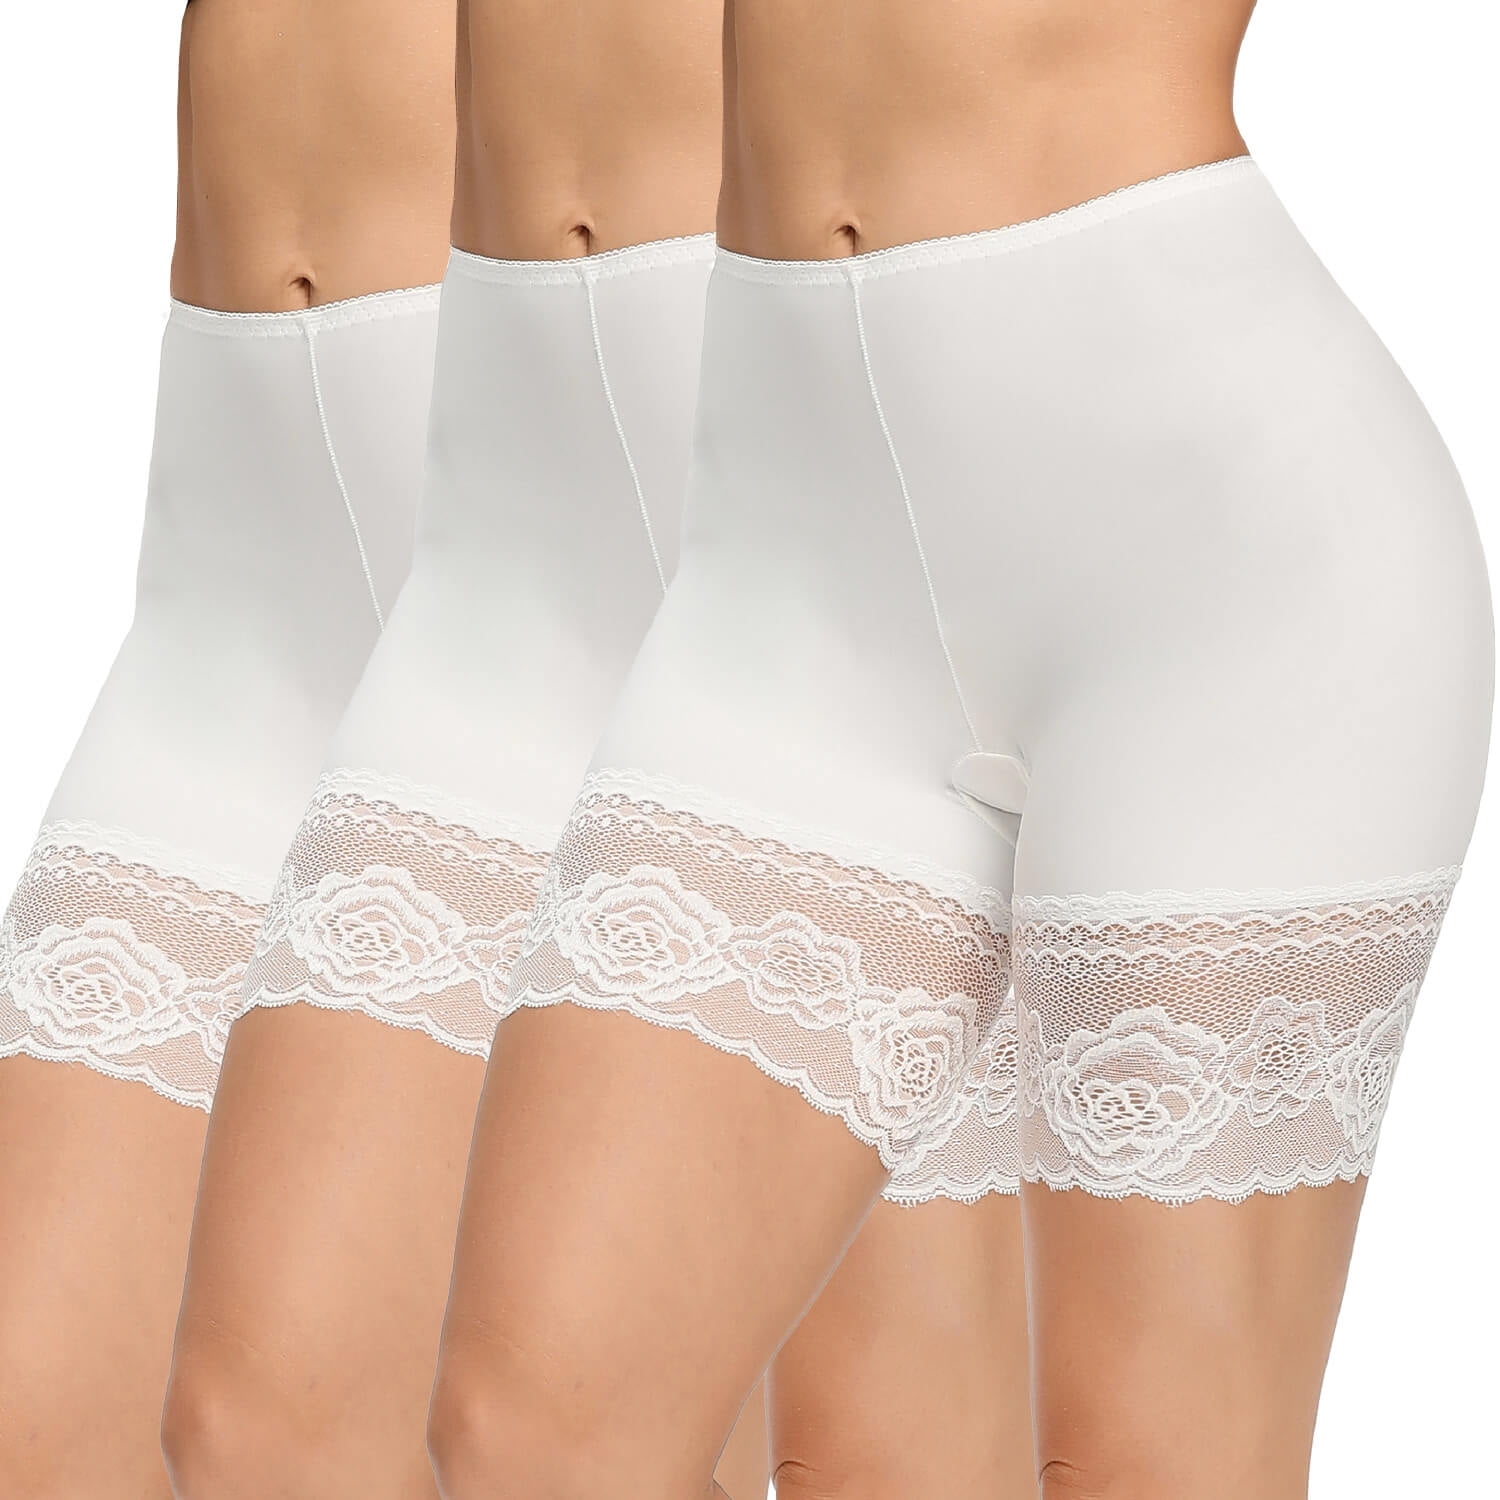 MANIFIQUE 2 Pack Women Slip Shorts for Under Dresses Anti Chafing